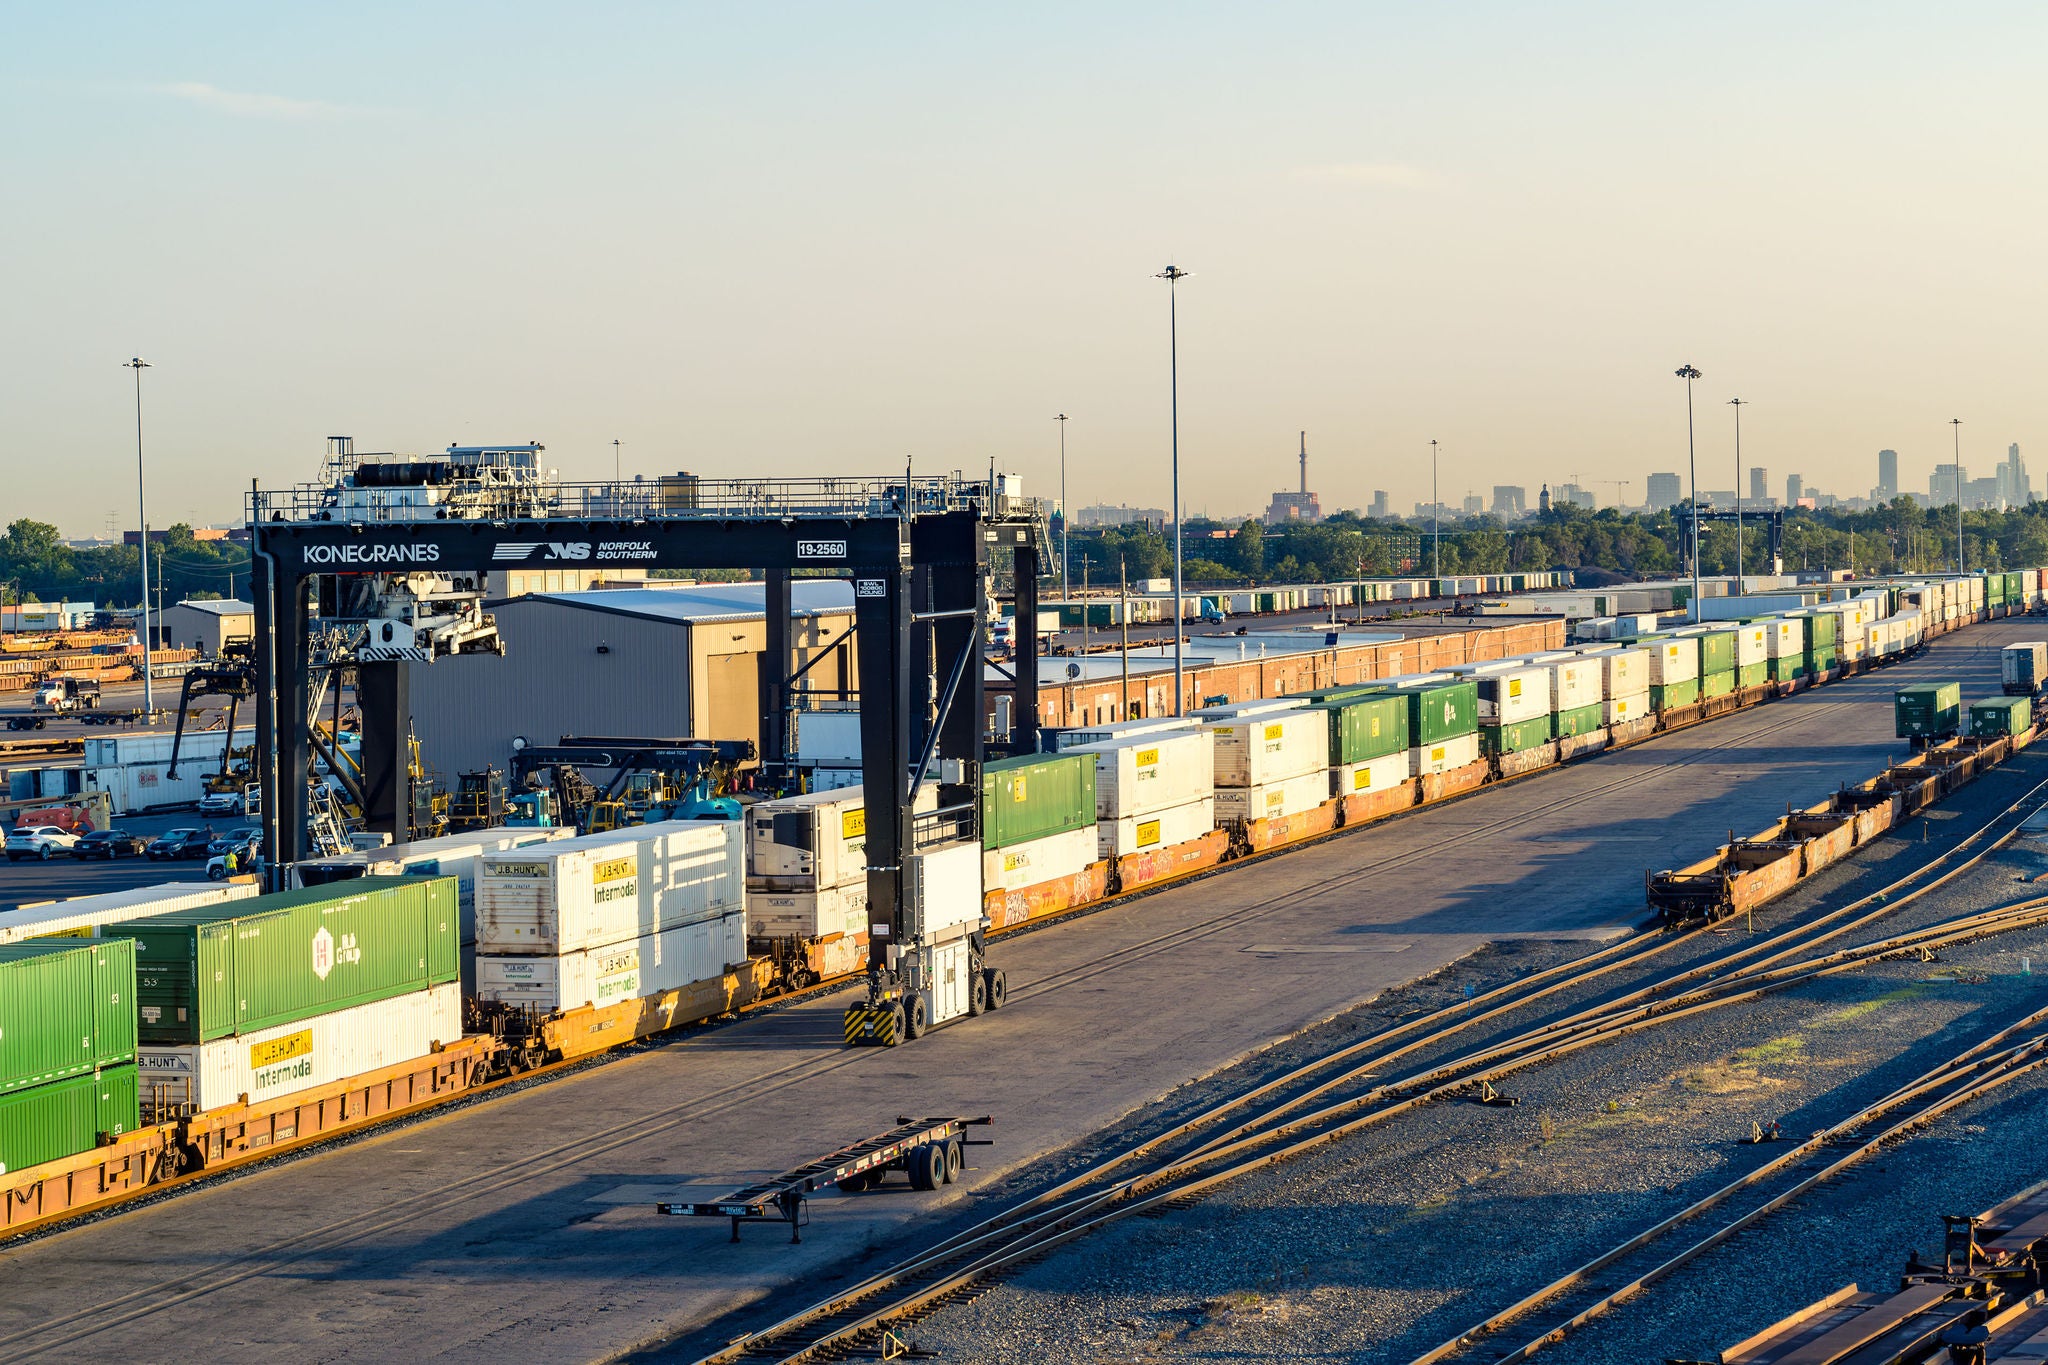 The sun sets on the intermodal shipping containers stationed at Norfolk Southern’s intermodal facility.